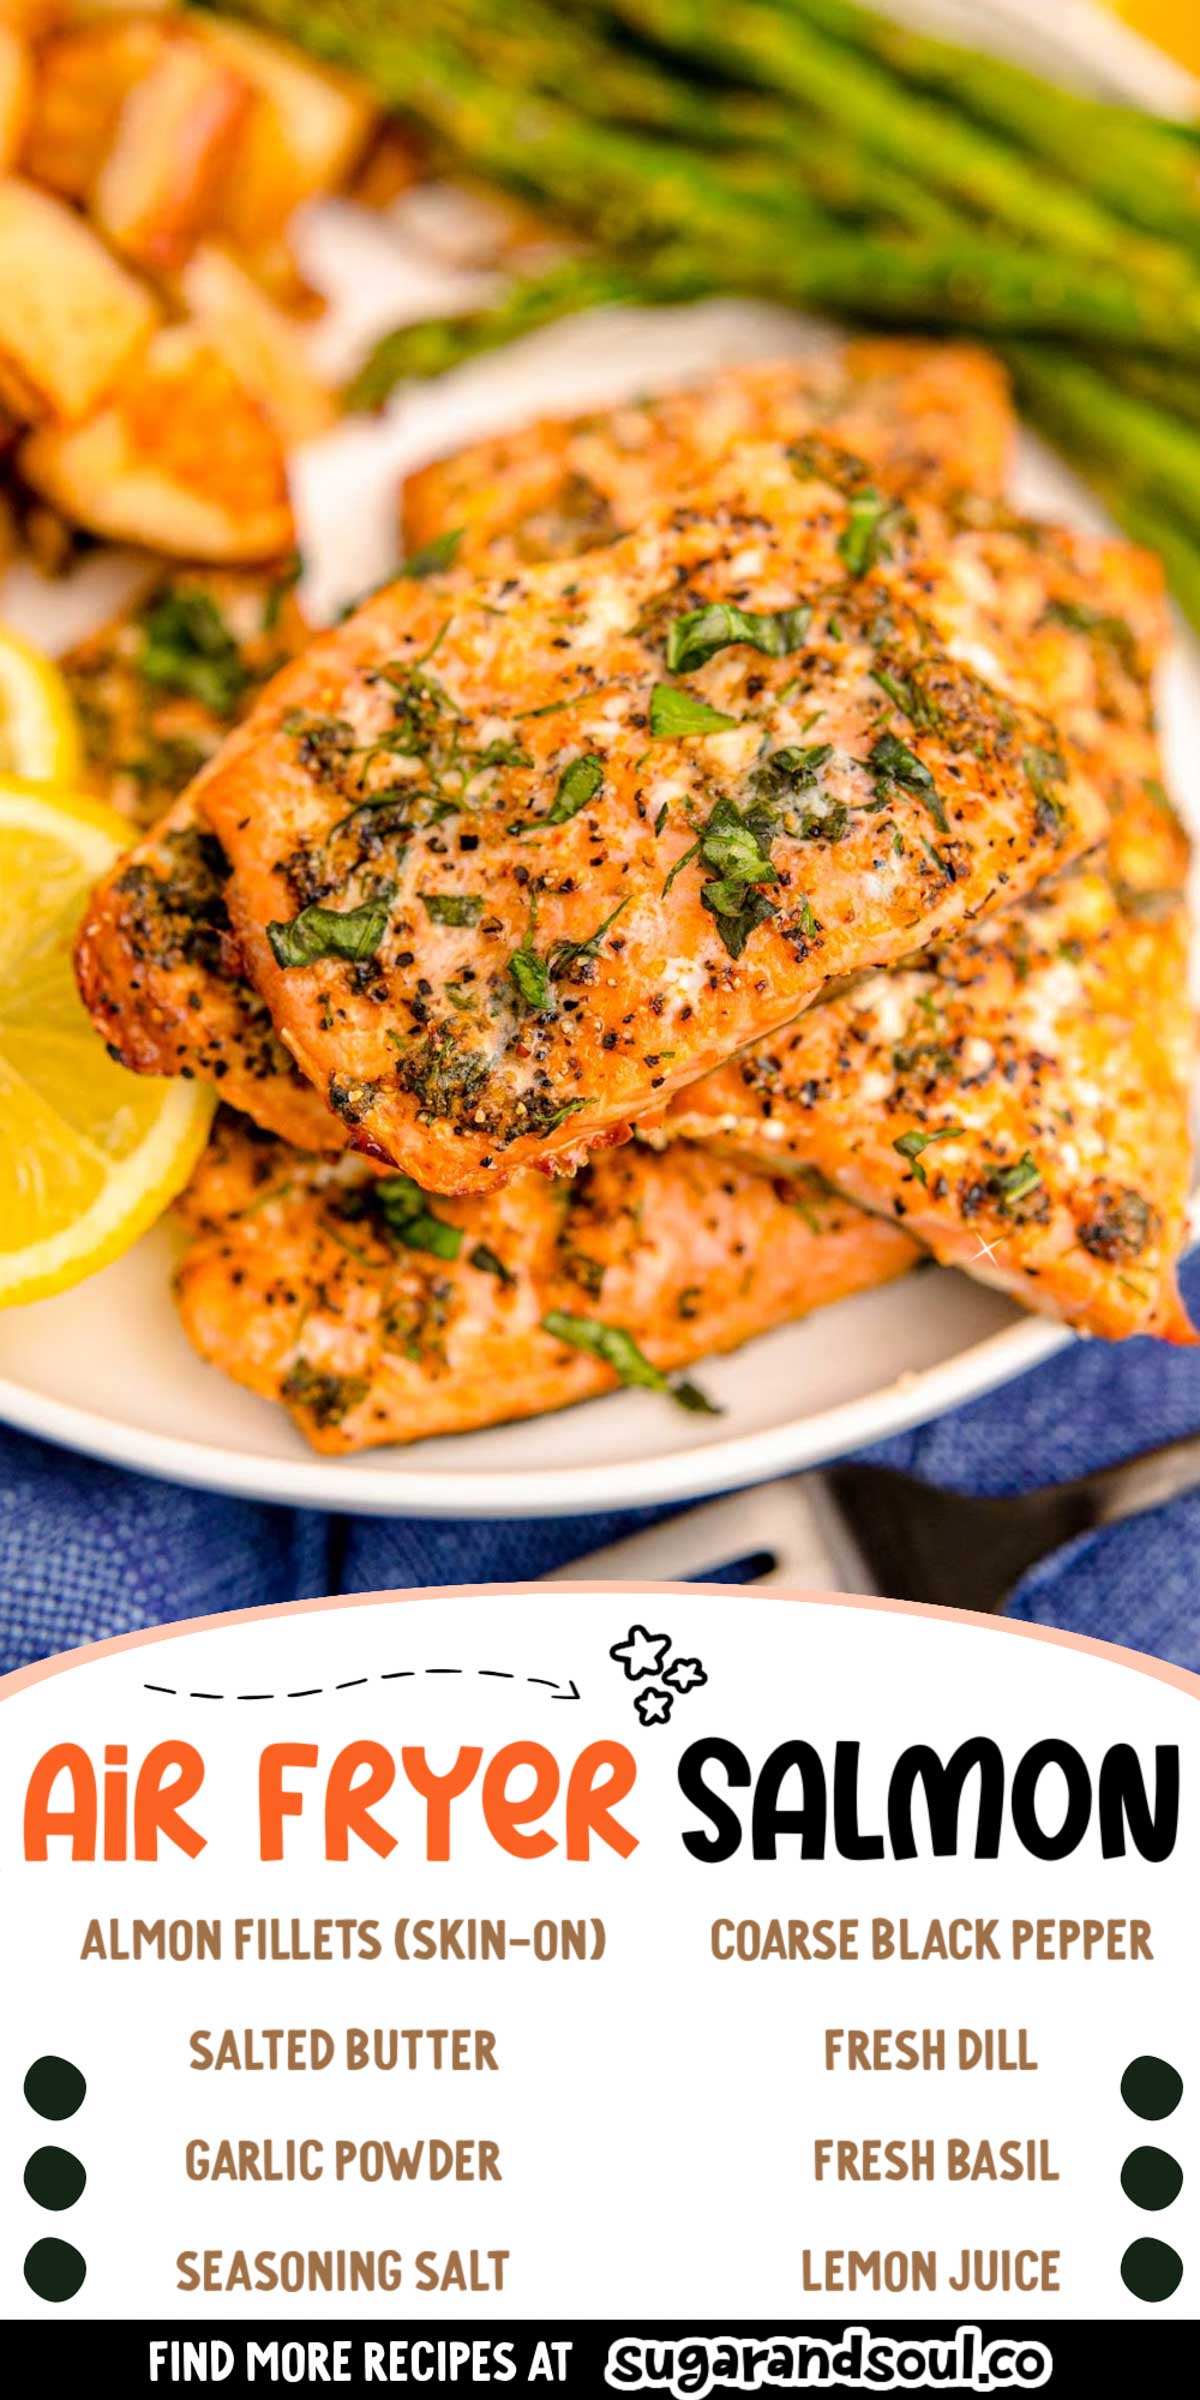 This Air Fryer Salmon is a quick and easy, healthy dinner option seasoned with garlic, basil, dill, and lemon that cooks in just 15 minutes making it great for busy weeknights! via @sugarandsoulco